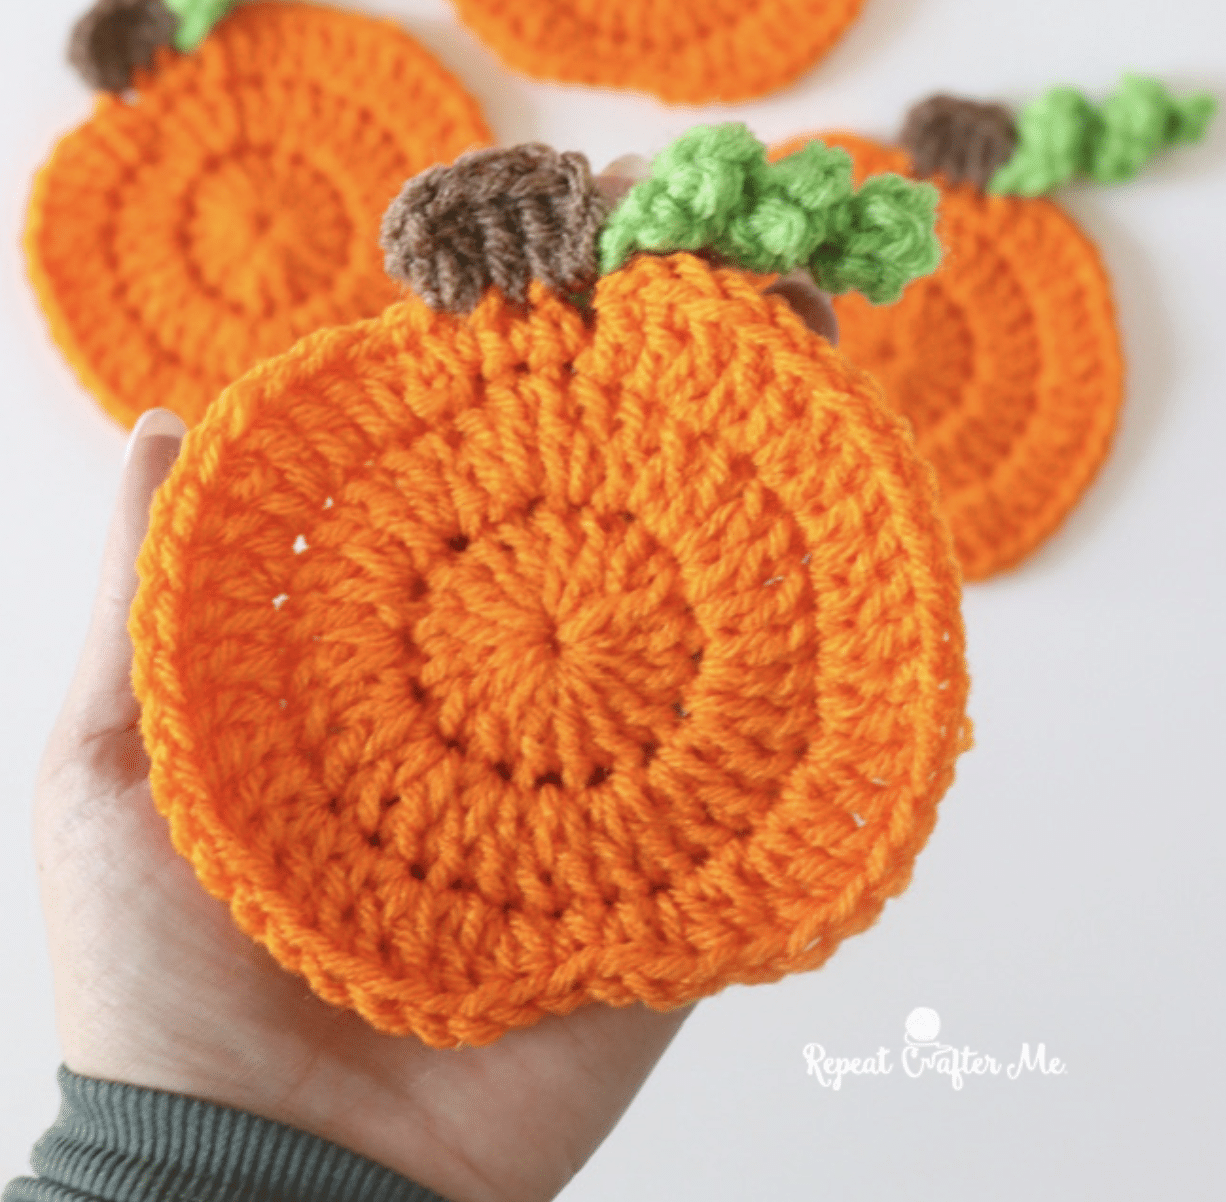 25 Fall Crochet Patterns to Start Off the Season - I Can Crochet That